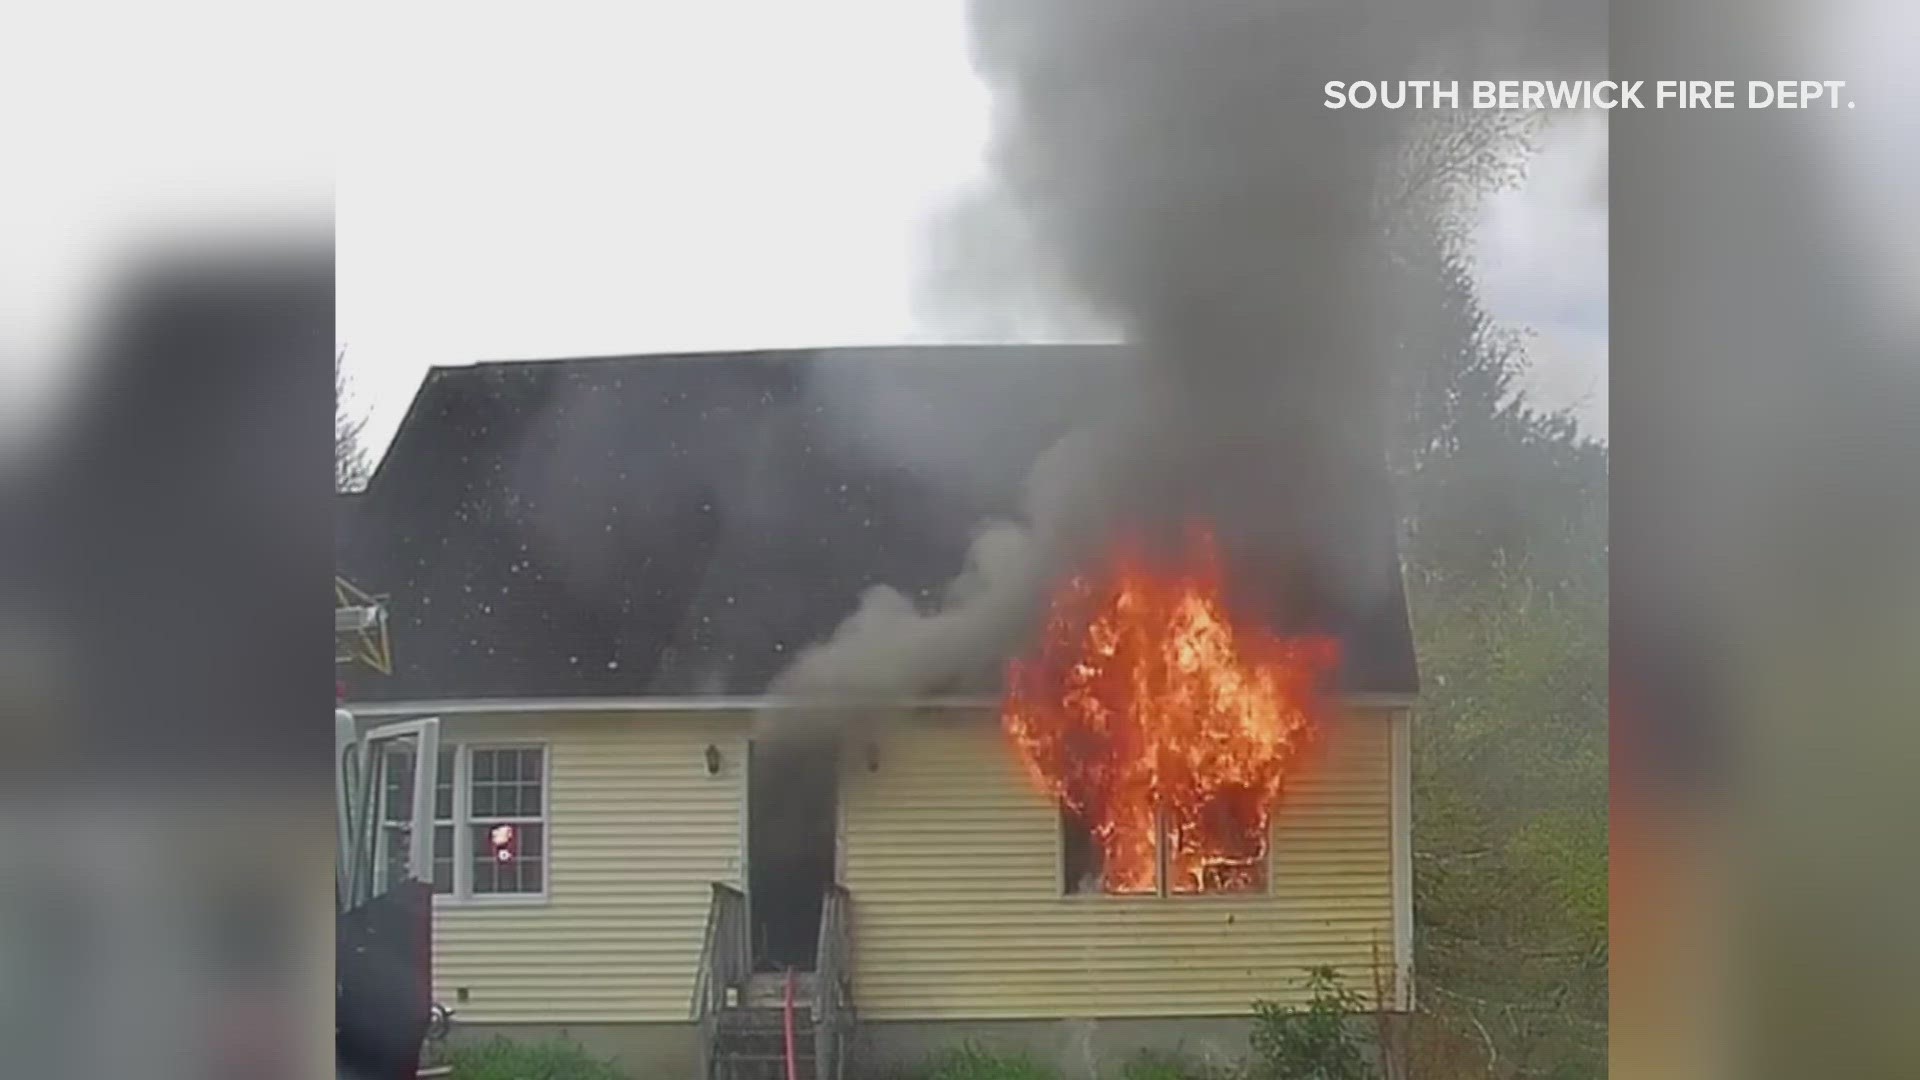 The home sustained smoke, heat, and water damage, the fire department said in a Facebook post.